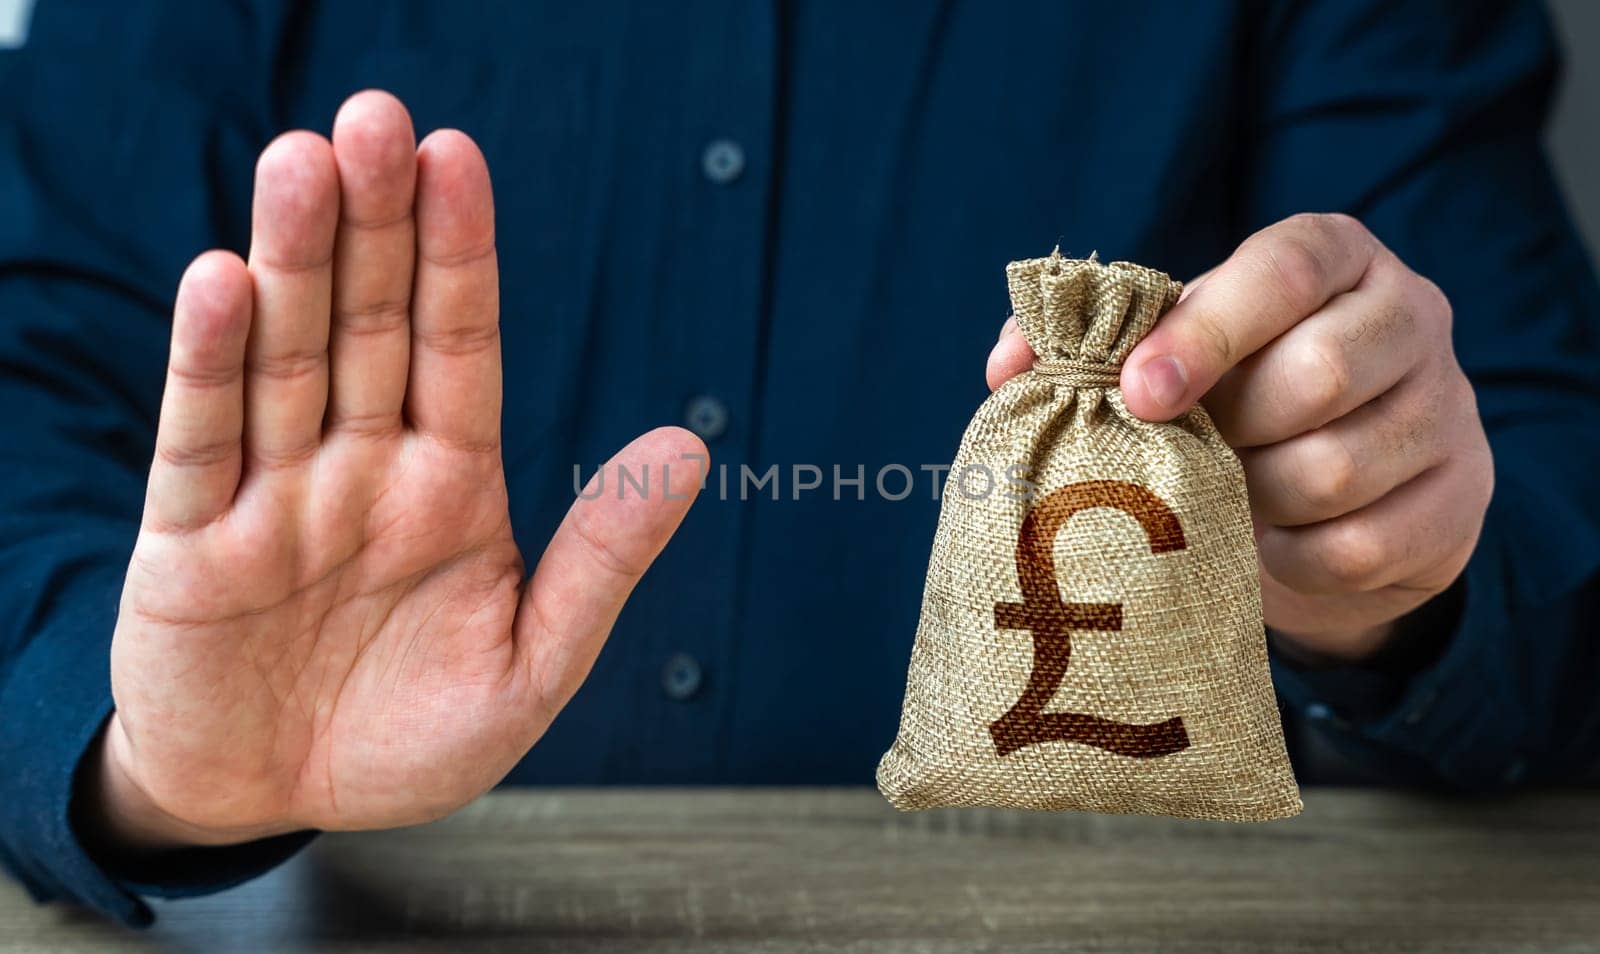 Stop gesture and british pound sterling money bag. Financial difficulties. Asset freeze seizure. Economic sanctions, confiscation of funds. The man does not approve of the transaction or loan. by iLixe48